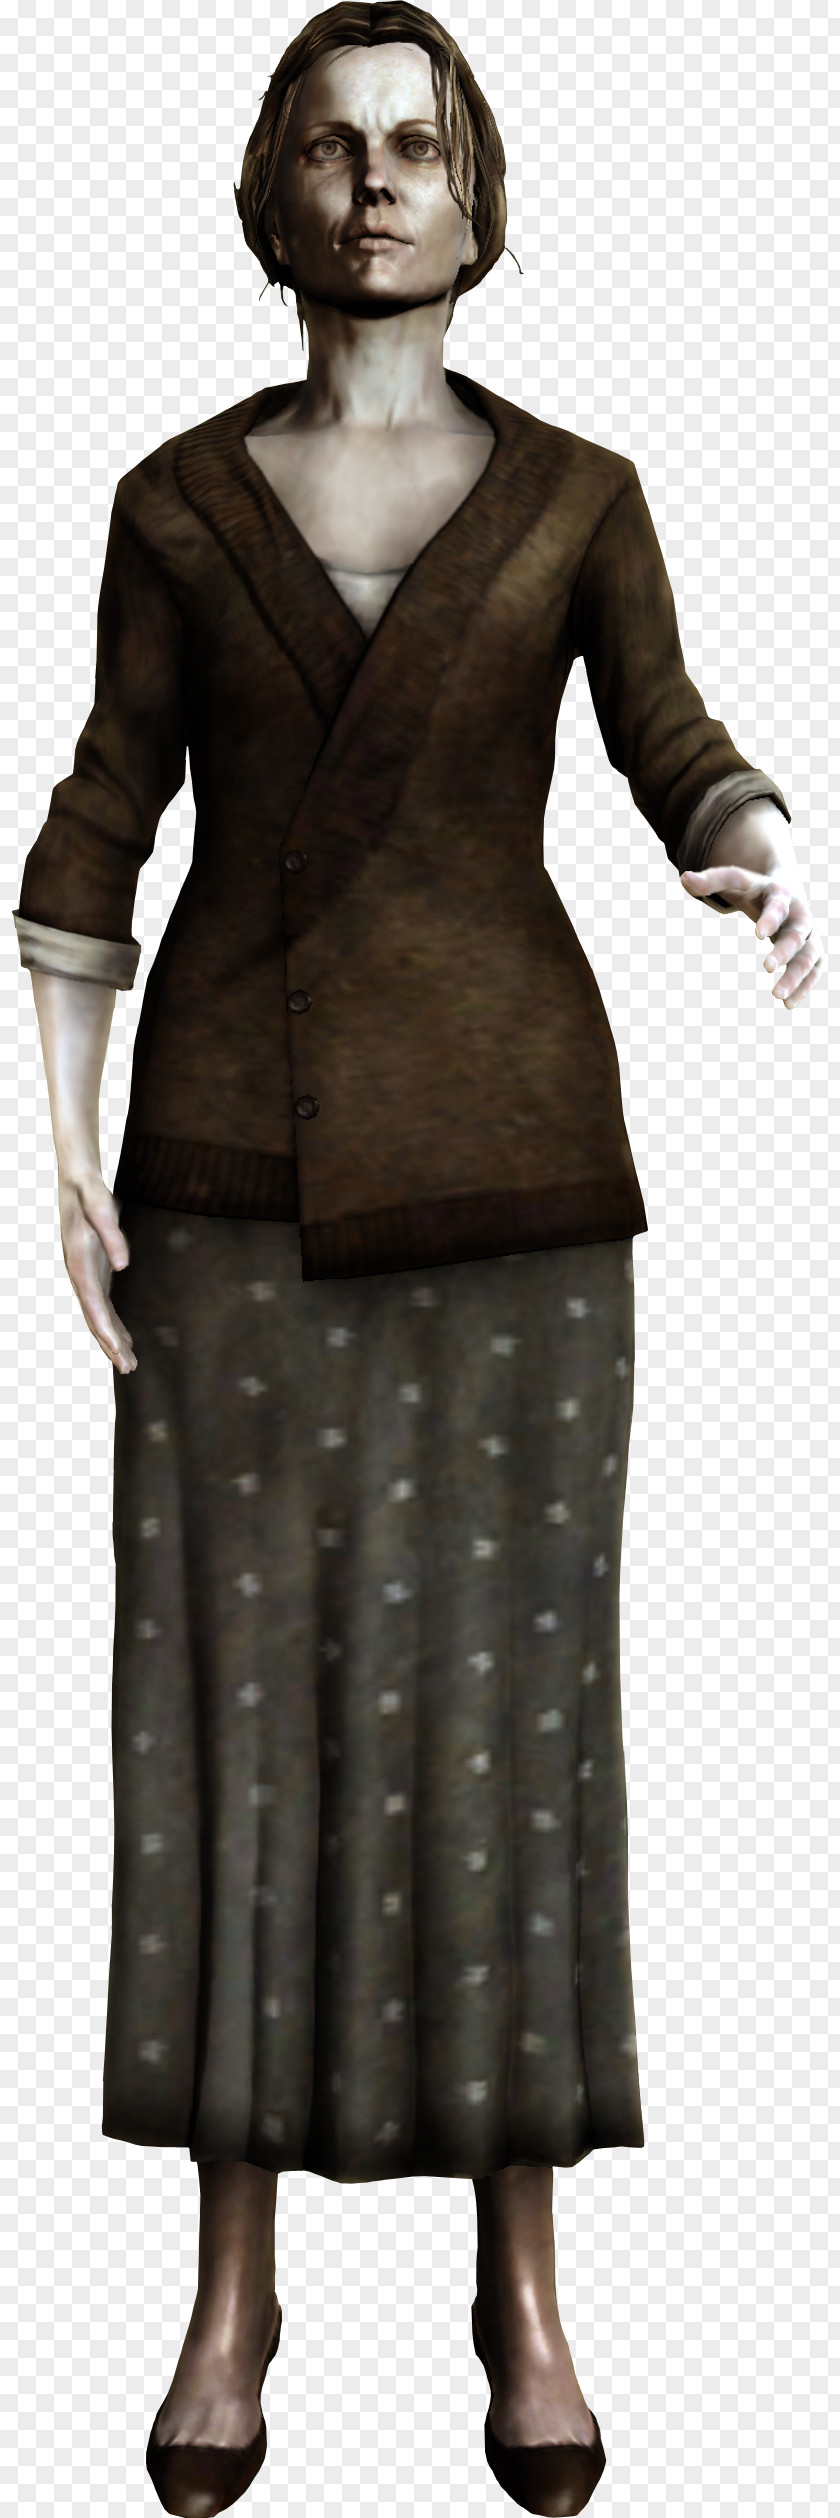 Silent Hill: Homecoming Shepherd's Glen Character Survival Horror Protagonist PNG